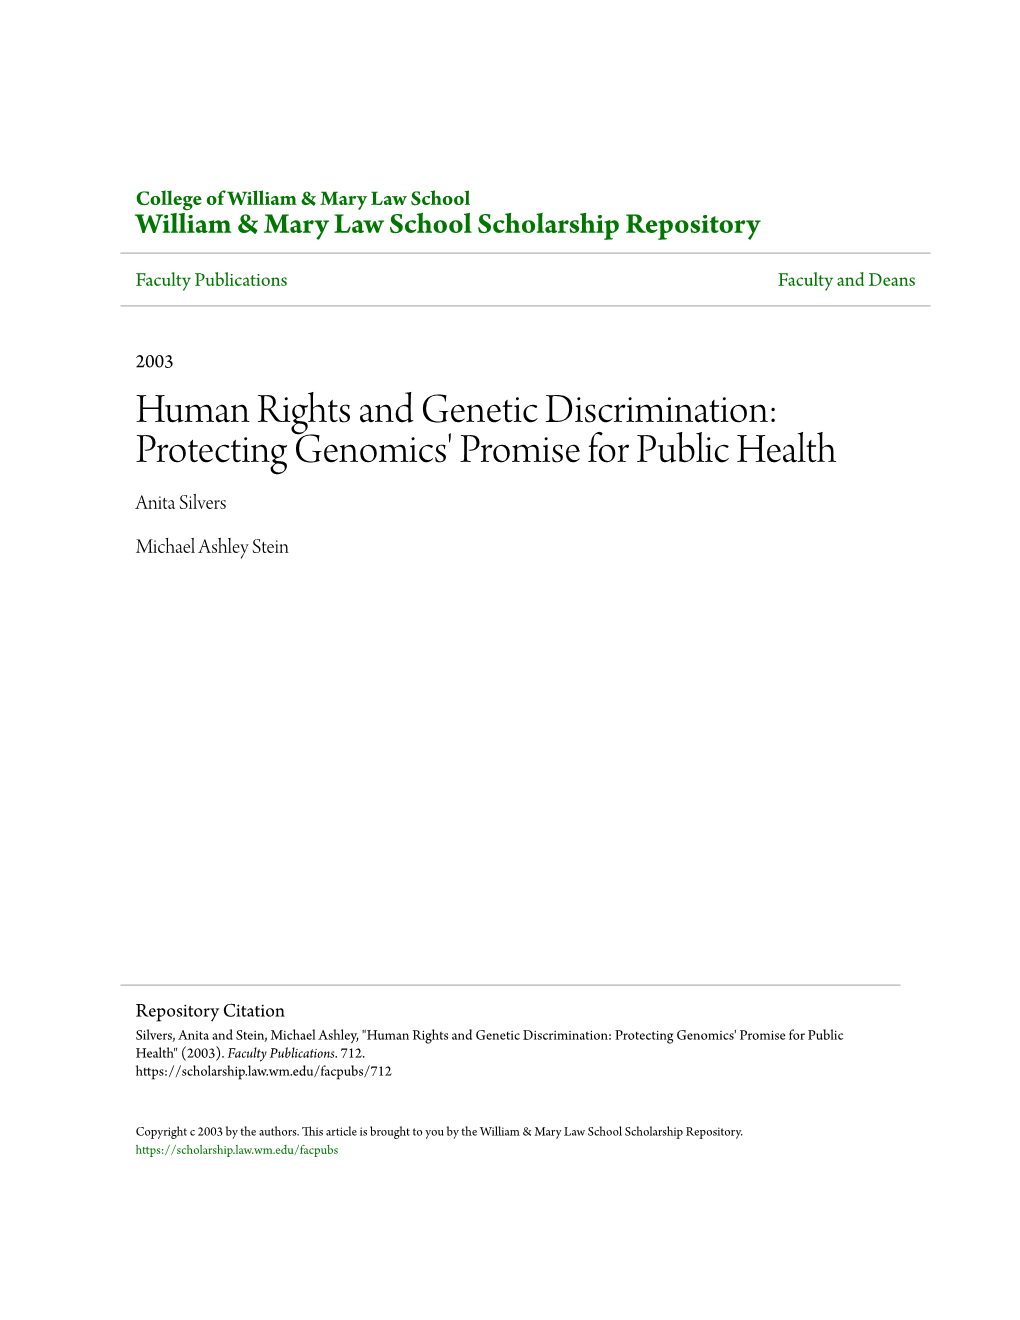 Human Rights and Genetic Discrimination: Protecting Genomics' Promise for Public Health Anita Silvers